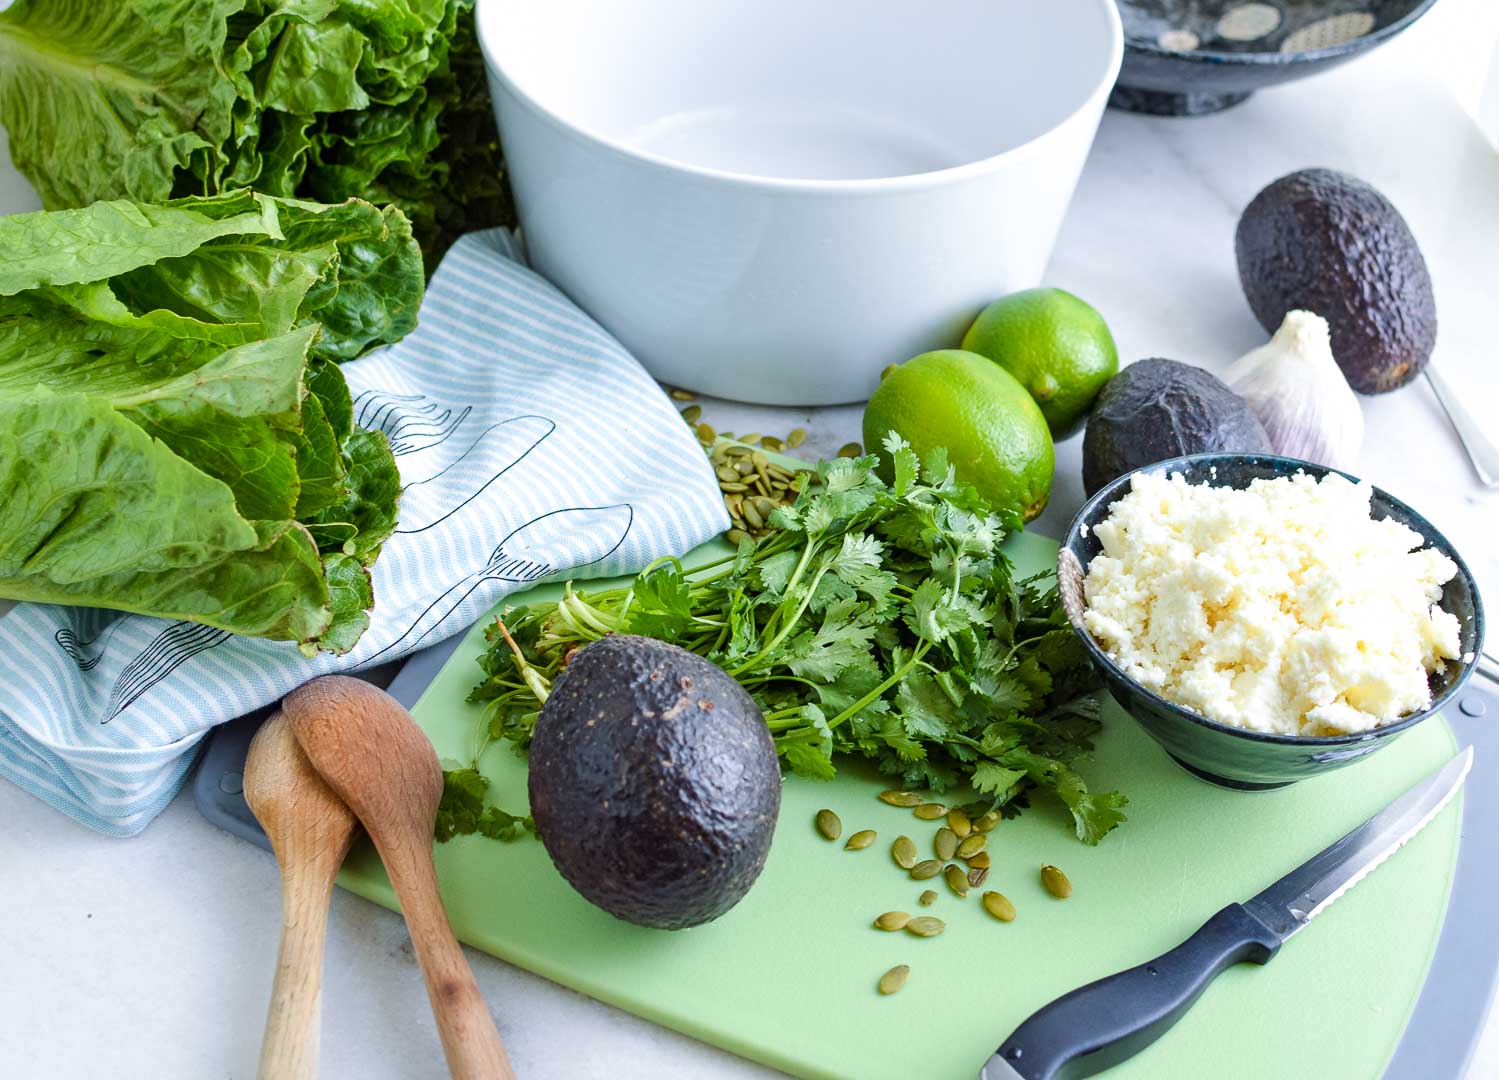 An empty white bowl with ingredients on the side: romaine lettuce, limes, cilantro, avocados, cheese on a cutting board and a knife.